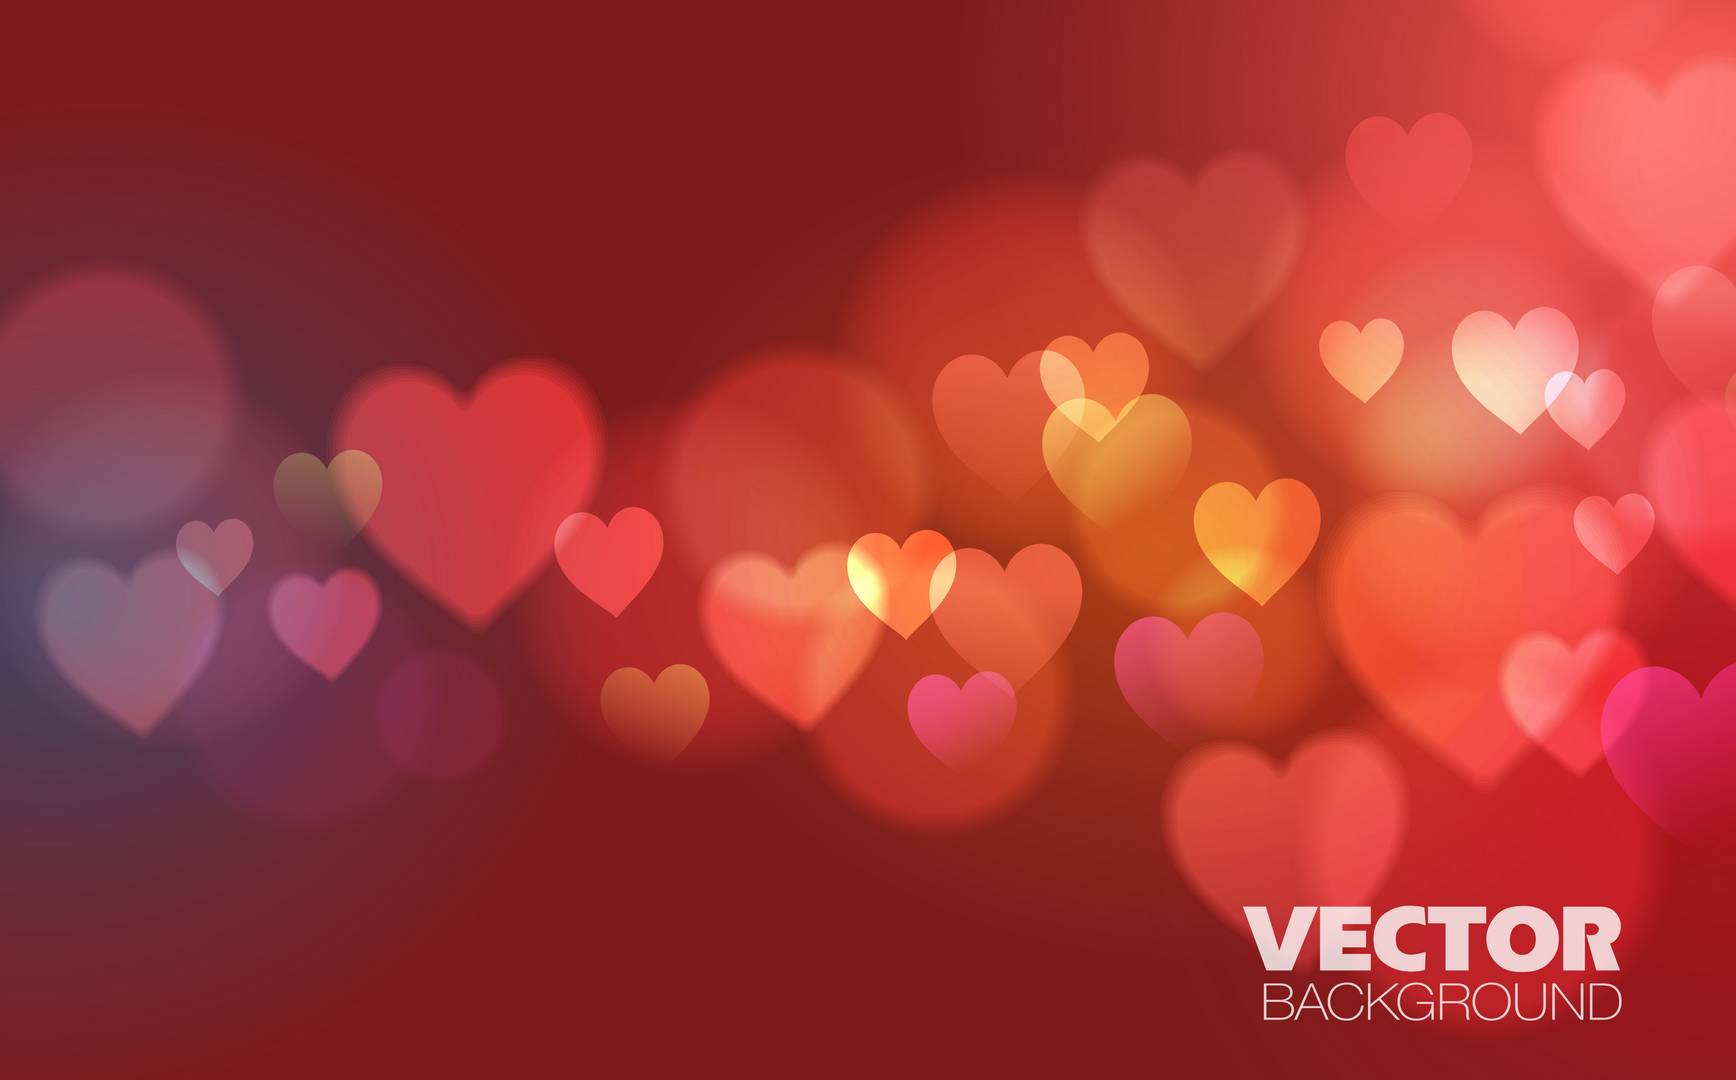  ll probably love these valentine day vector backgrounds